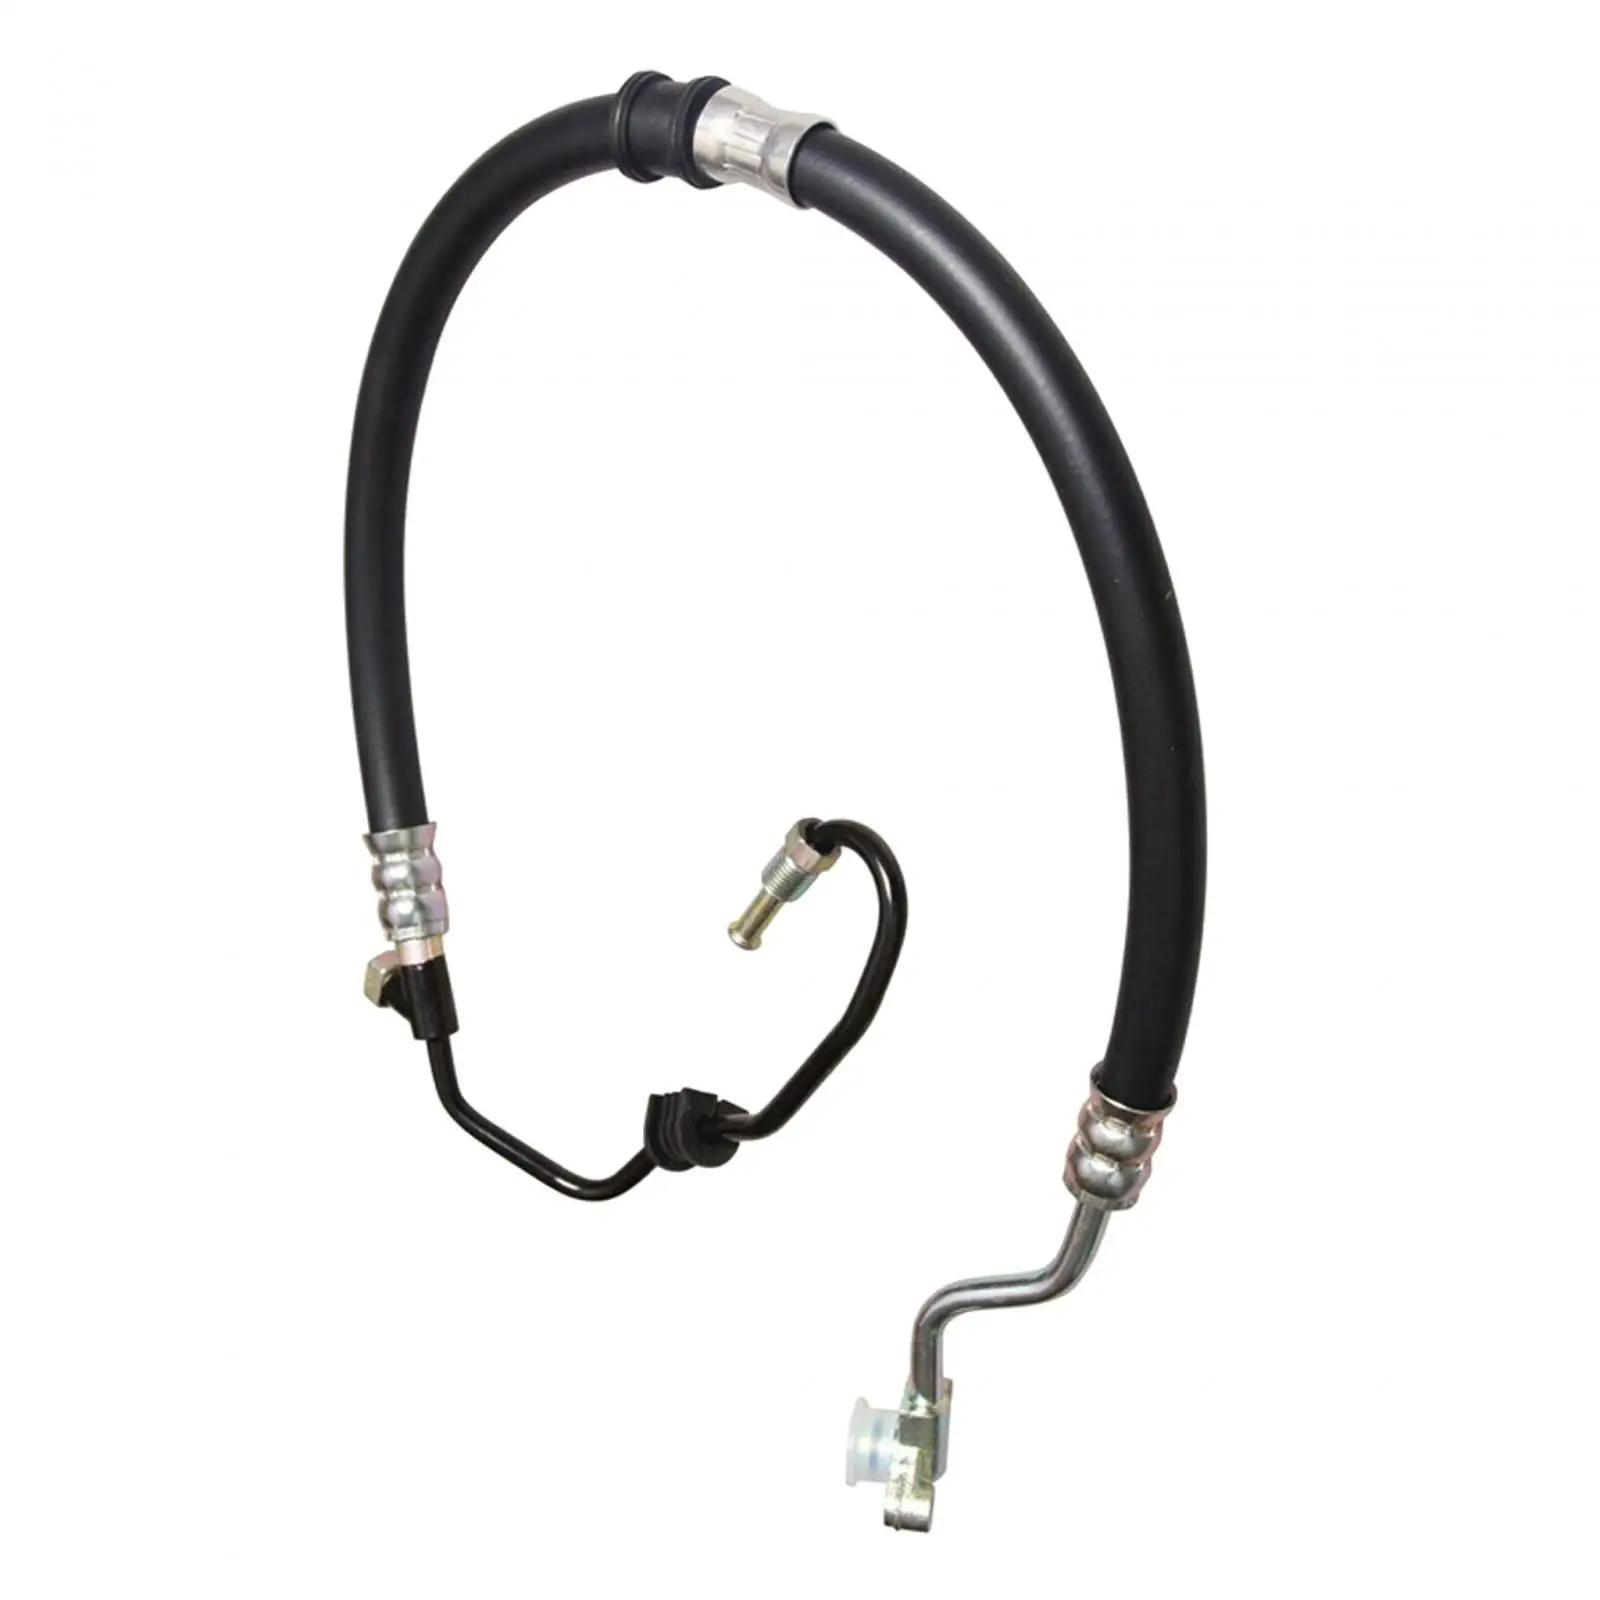 Power Steering Hose Assembly 53713-s84-a04 Spare Parts Repair Parts Replaces Easy Installation Accessory for Honda Accord